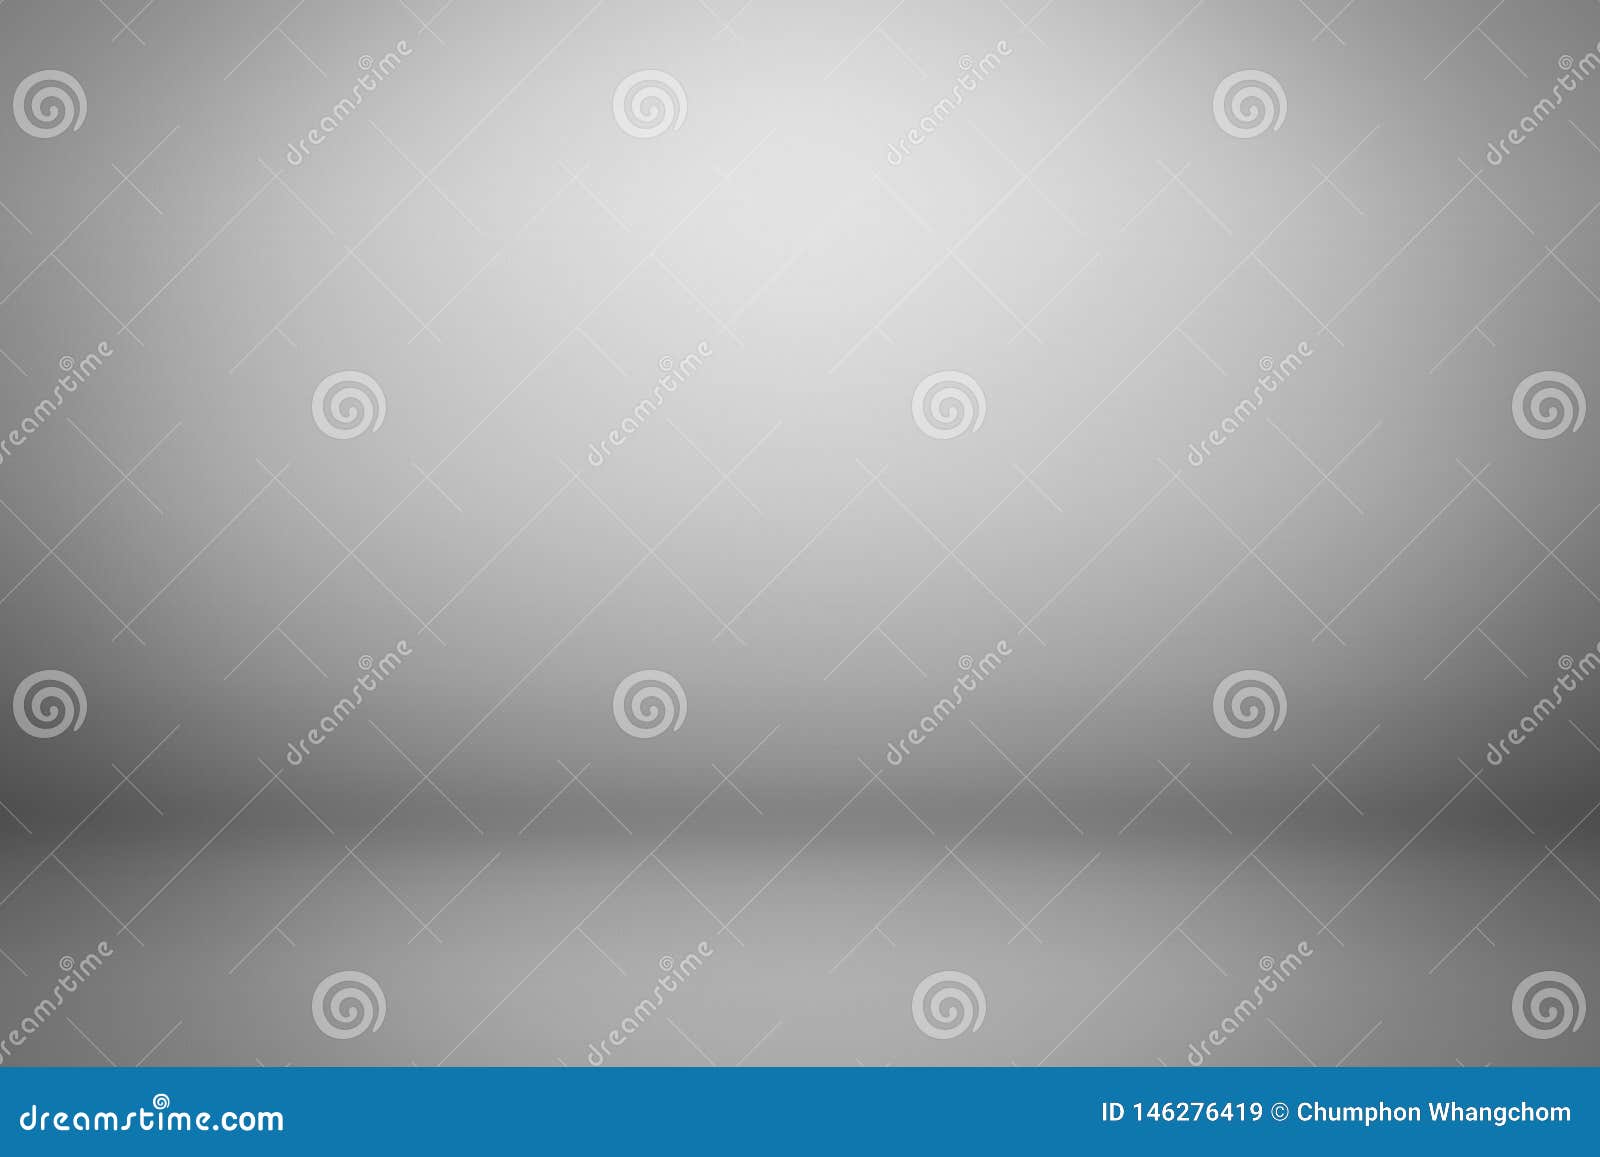 grey gradient backdrops. display product background